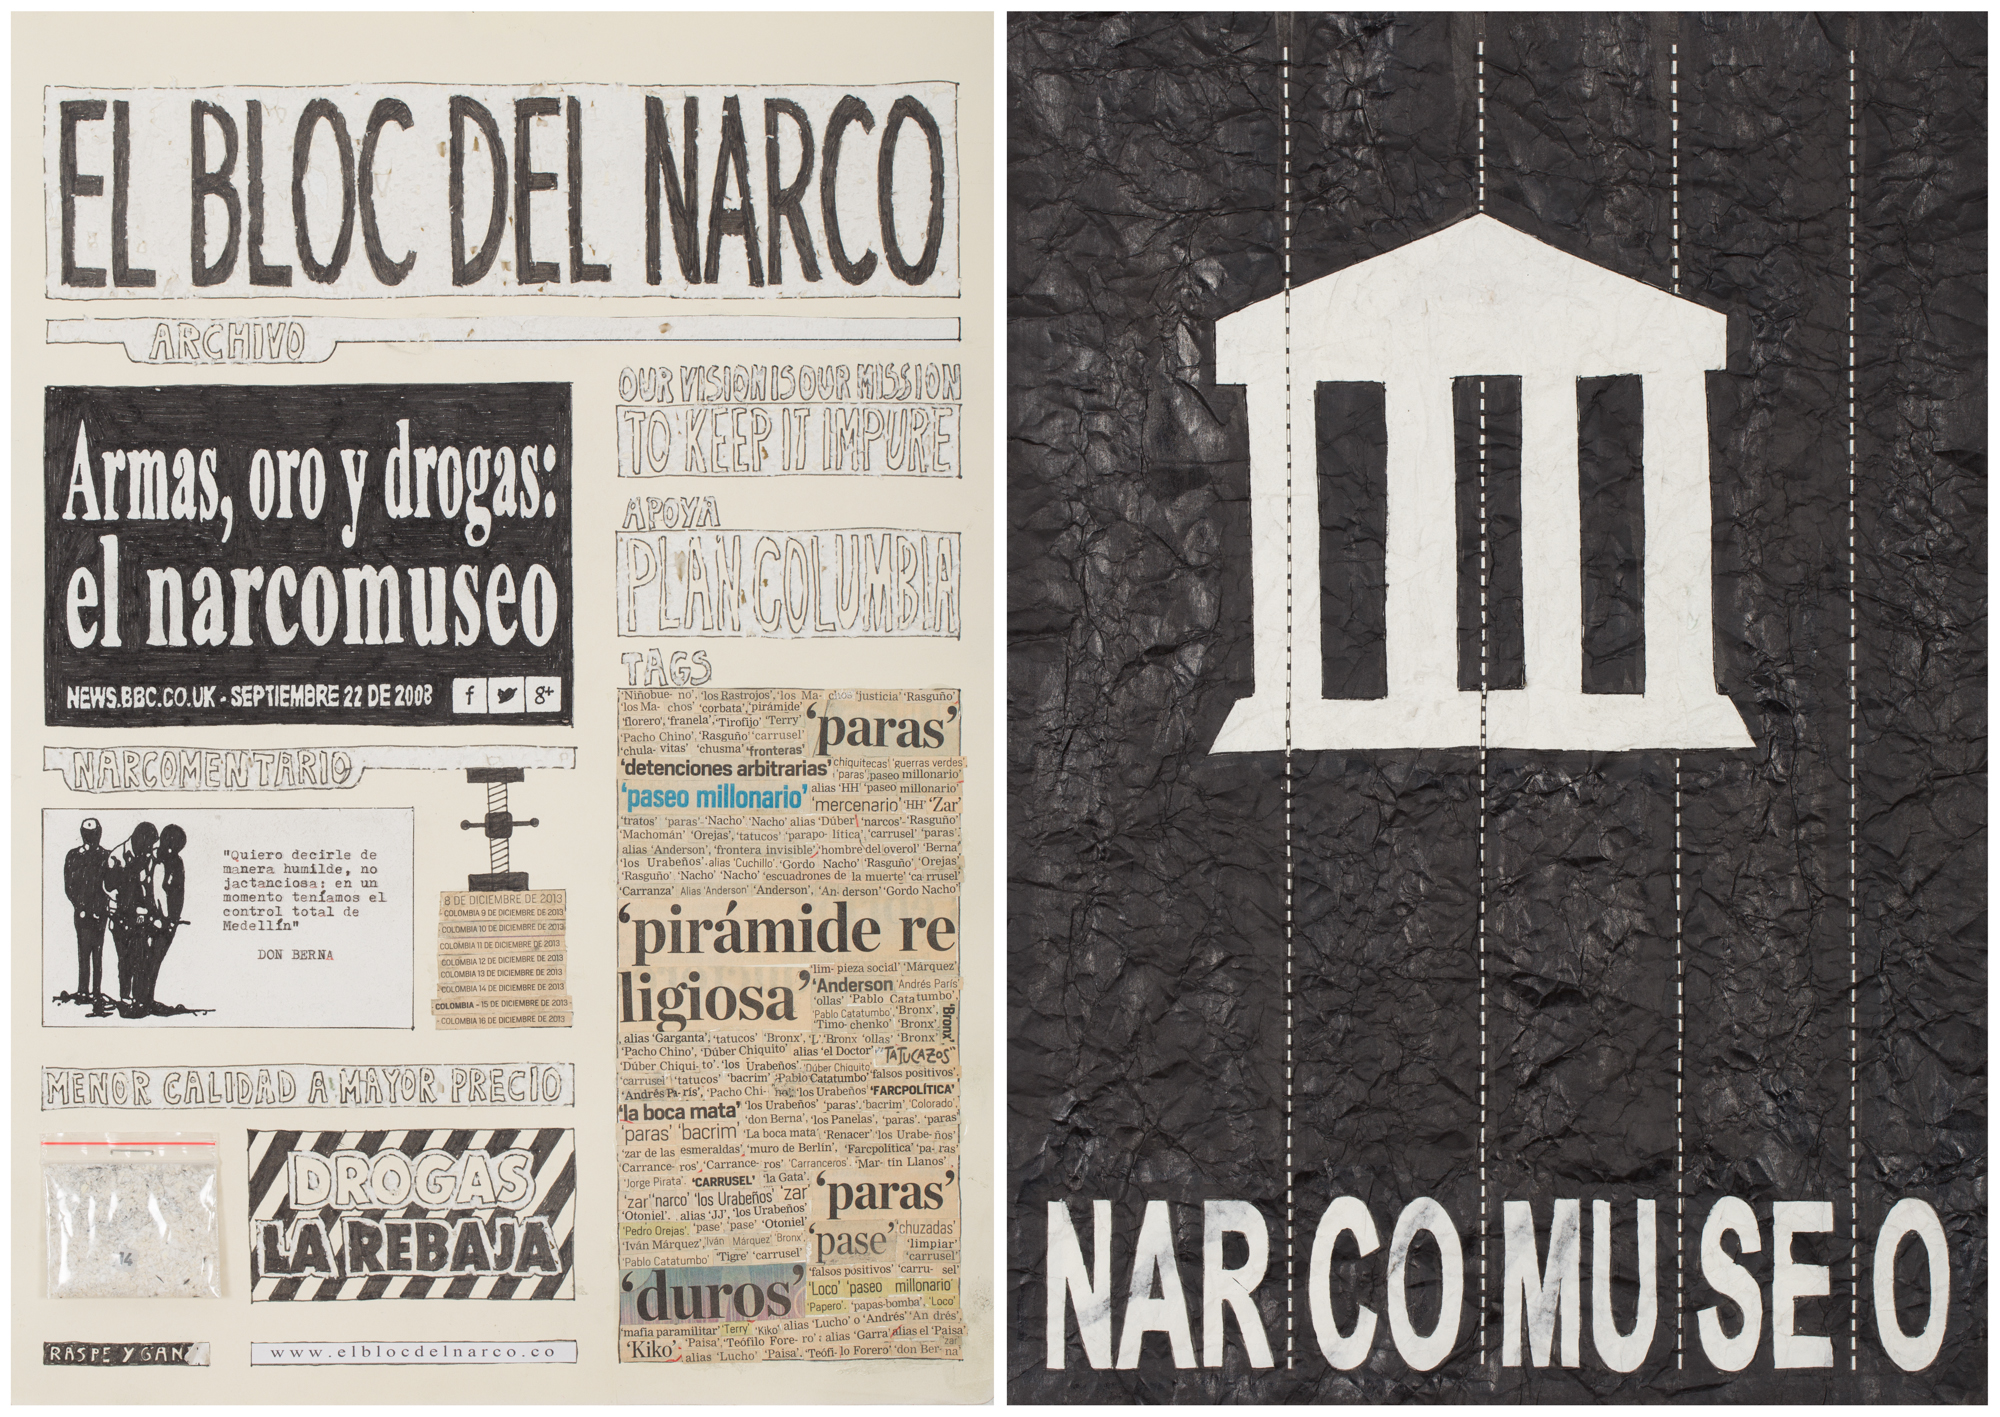 Camilo Restrepo. <em>El Bloc Del Narco #14</em>, 2016. Ink, water-soluble wax pastel, tape, glue, newspaper clippings, staples, plastic bag, paper dust and saliva on paper, 16 1/2 x 24 inches (41.9 x 61 cm)